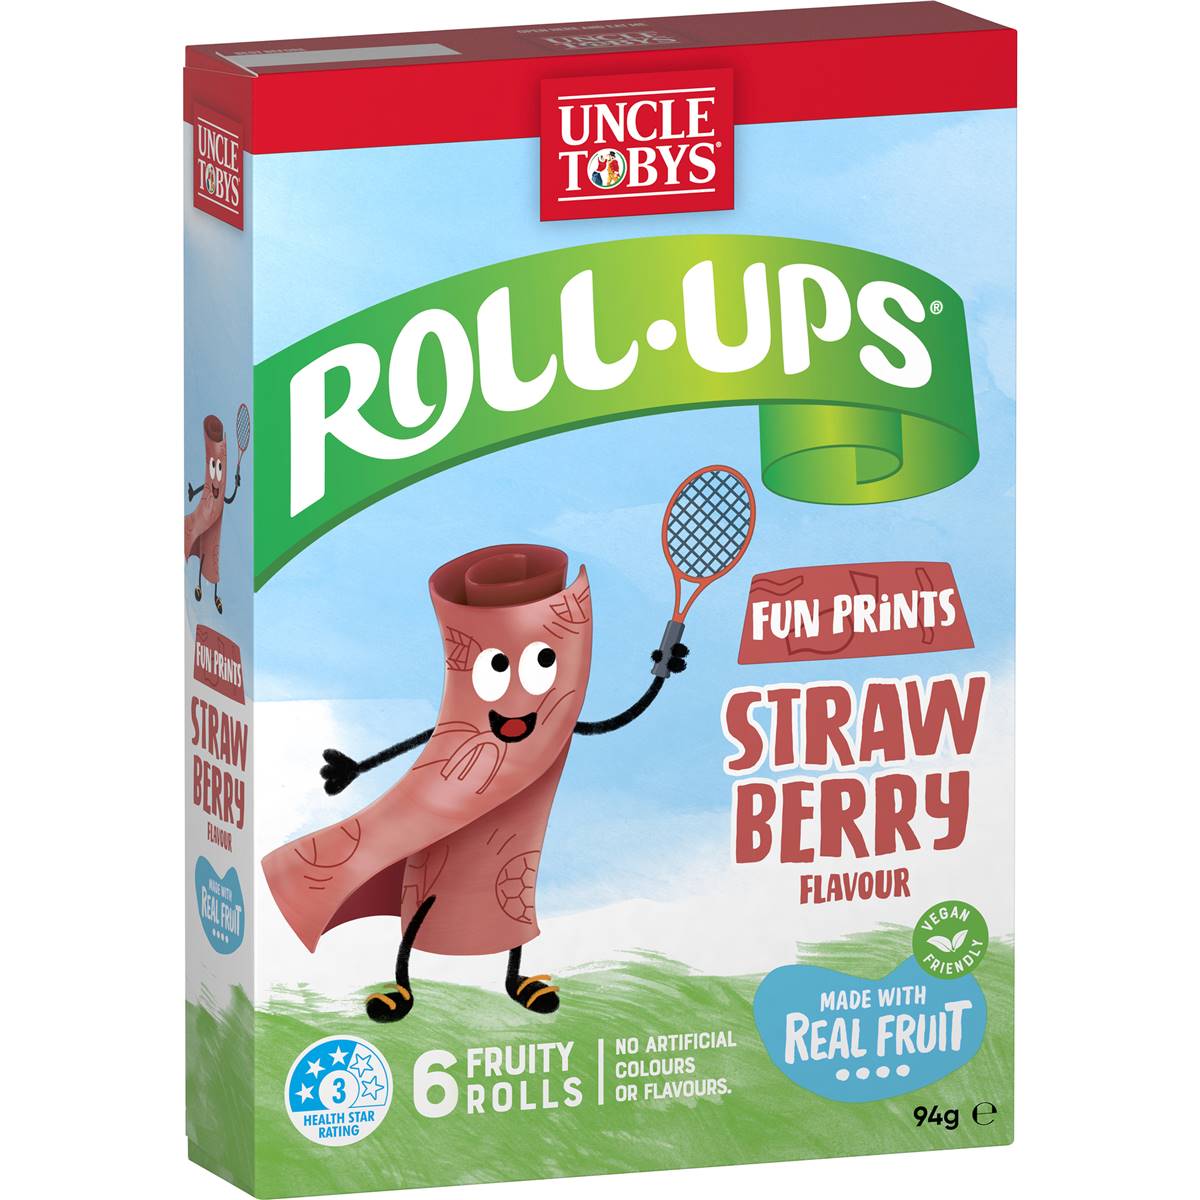 Calories in Uncle Tobys Roll-ups Strawberry Fun Prints